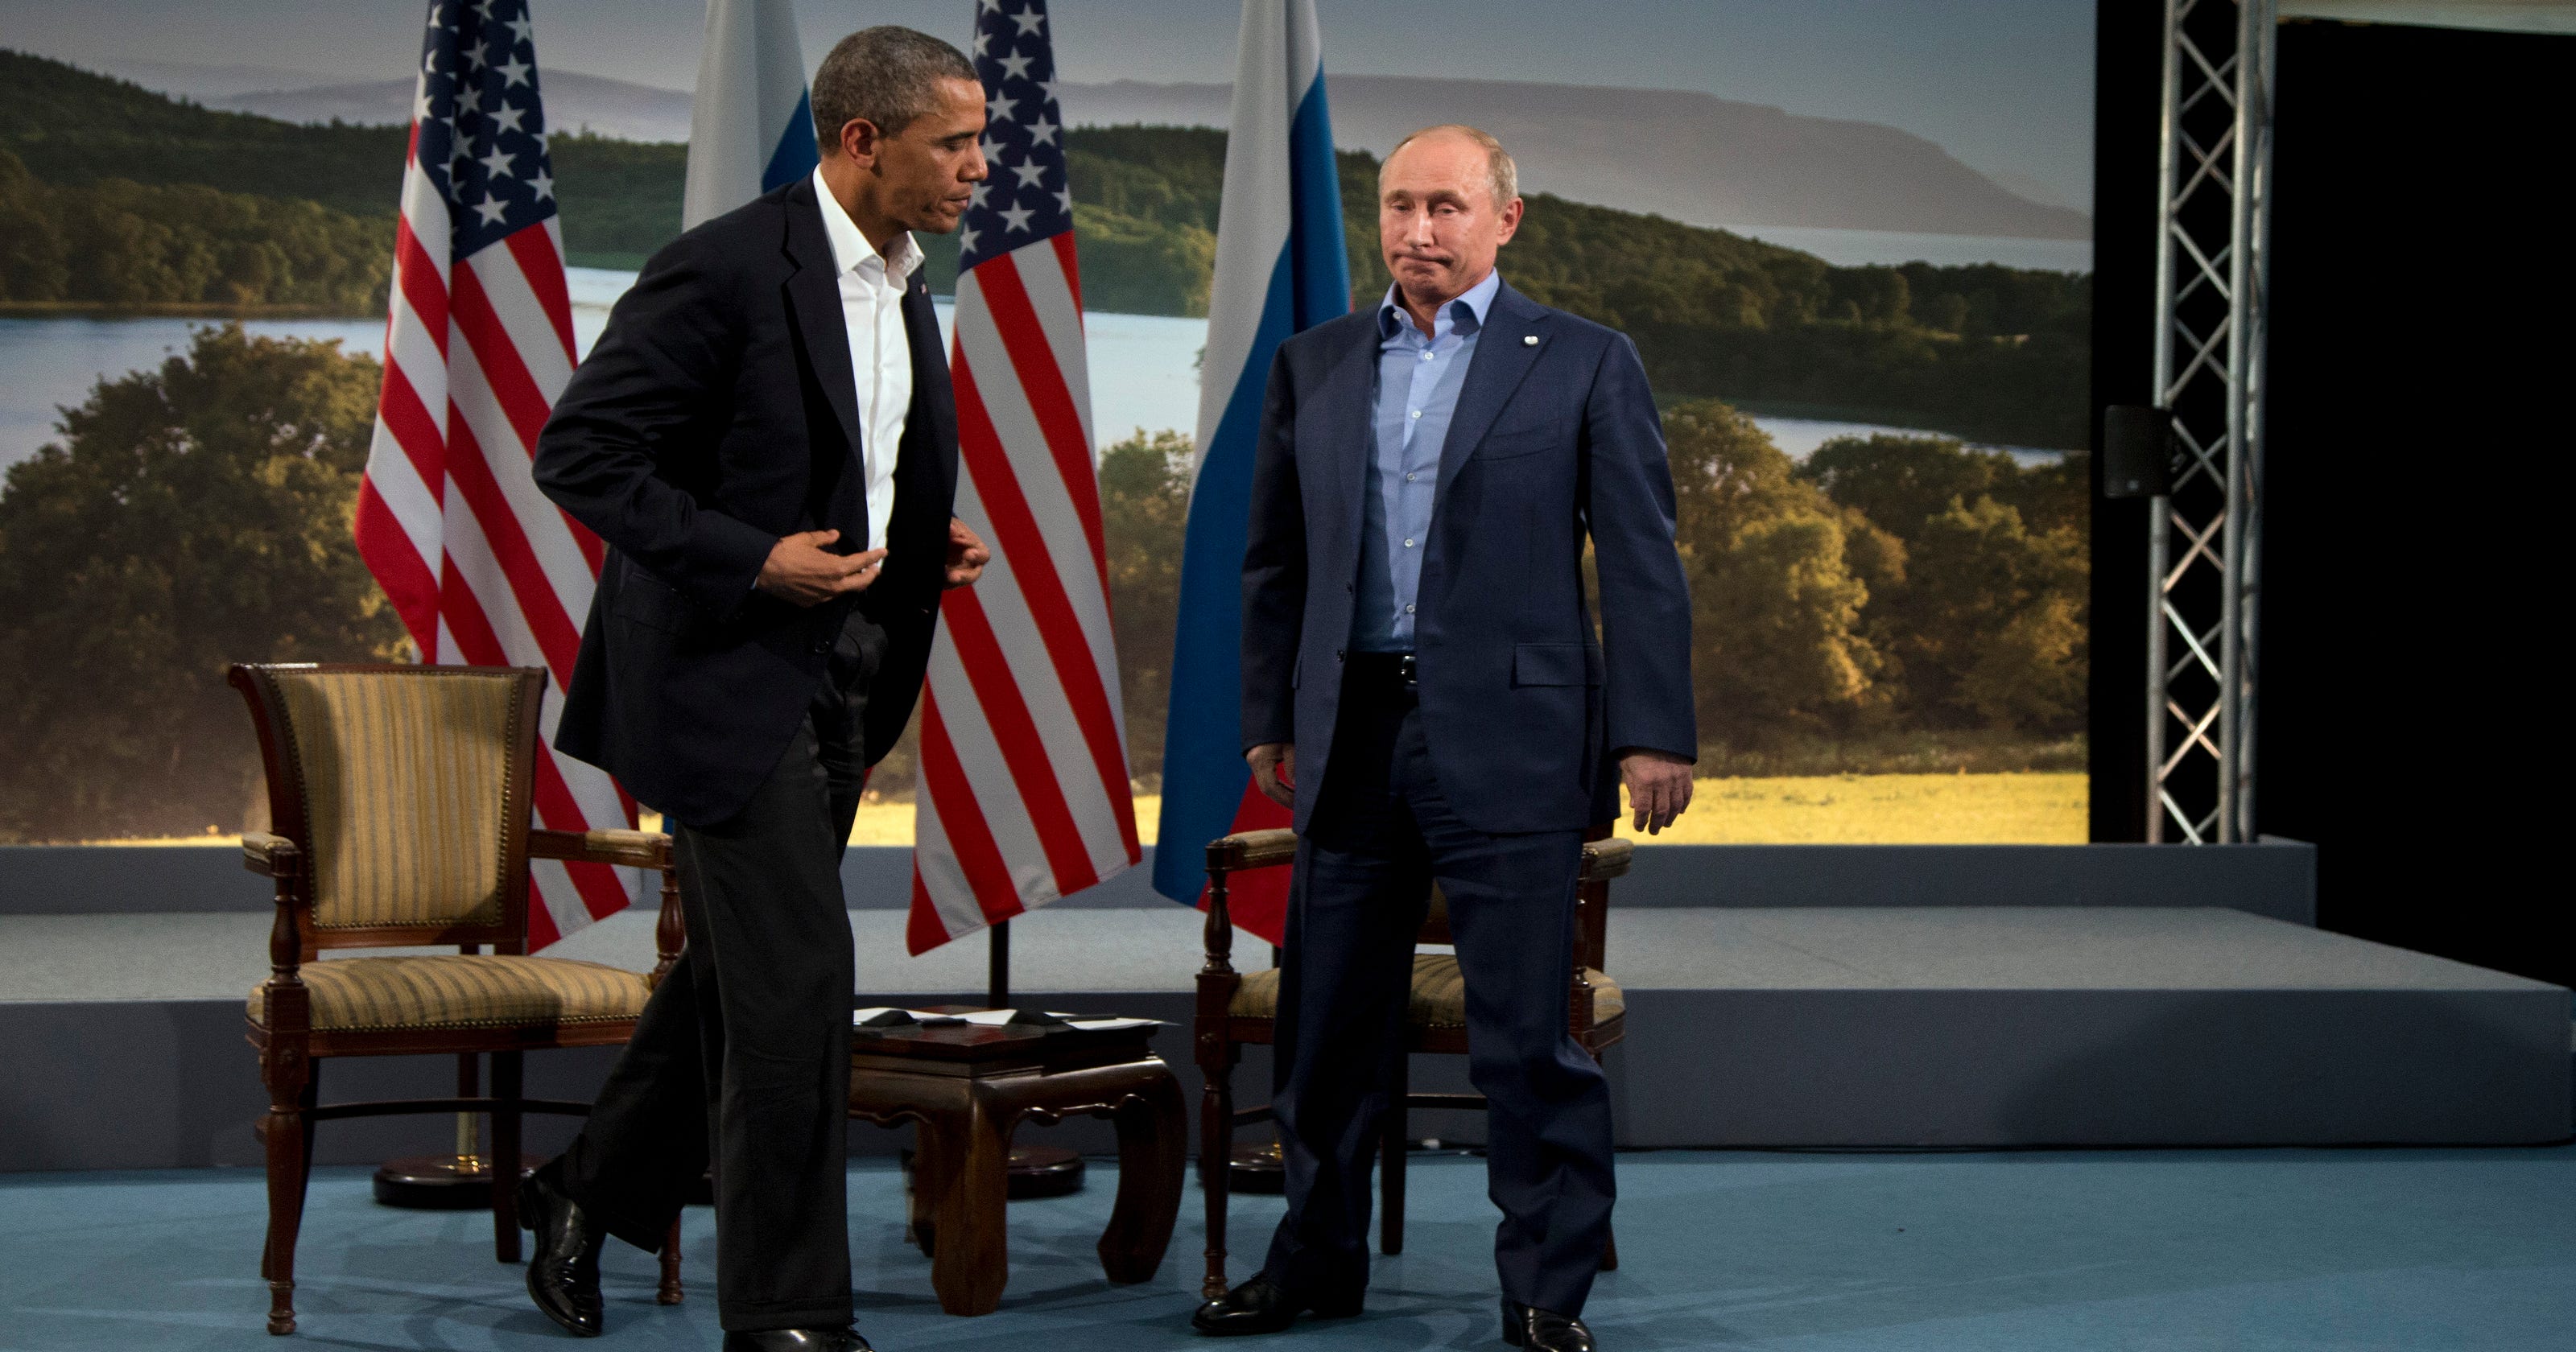 Obama Cancels Meetings With Putin Amid Tensions